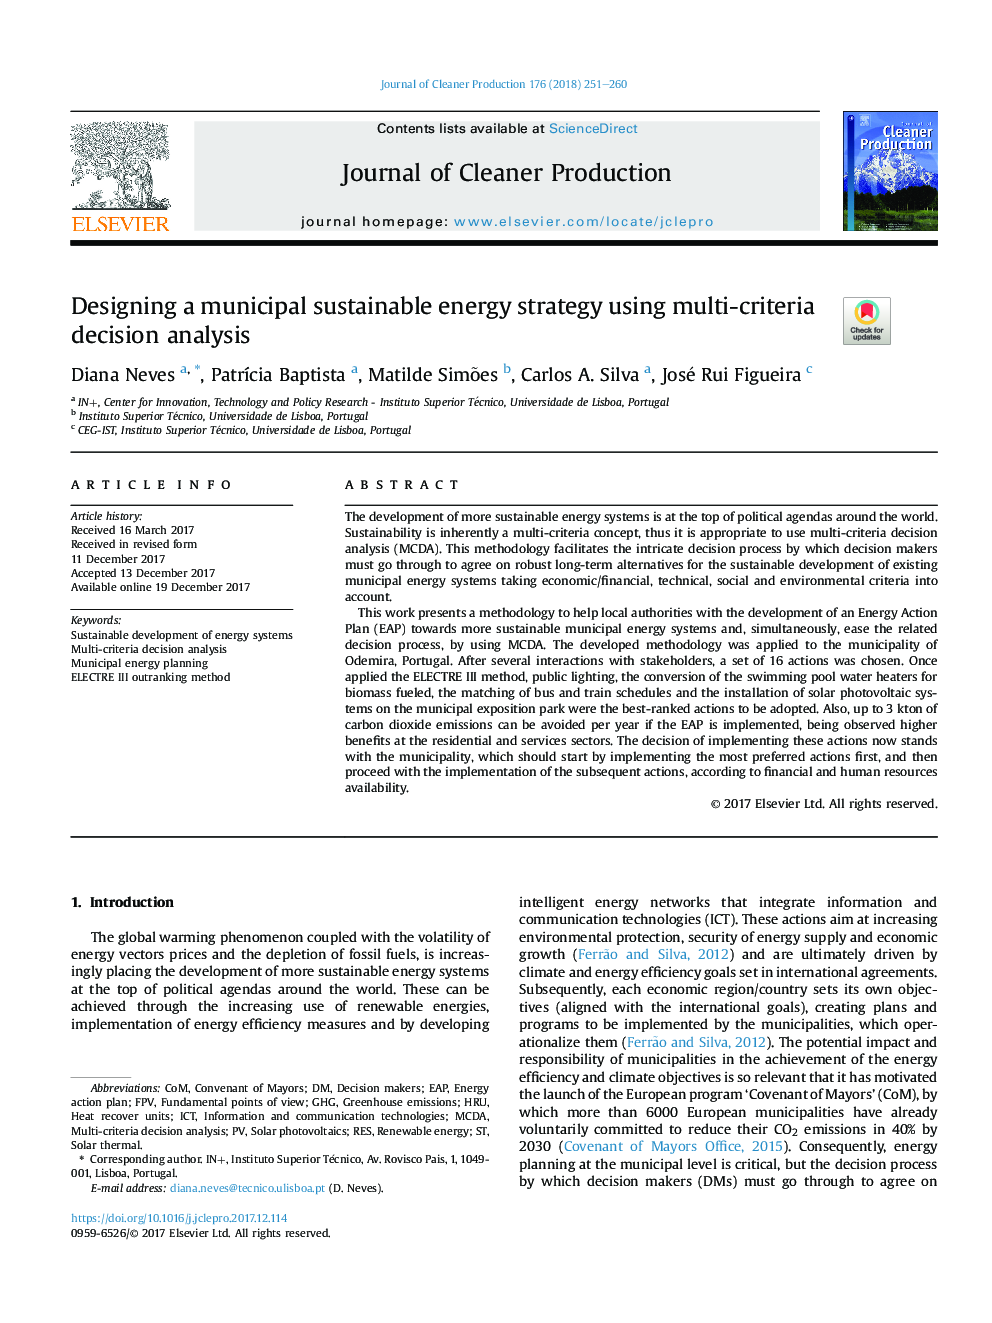 Designing a municipal sustainable energy strategy using multi-criteria decision analysis